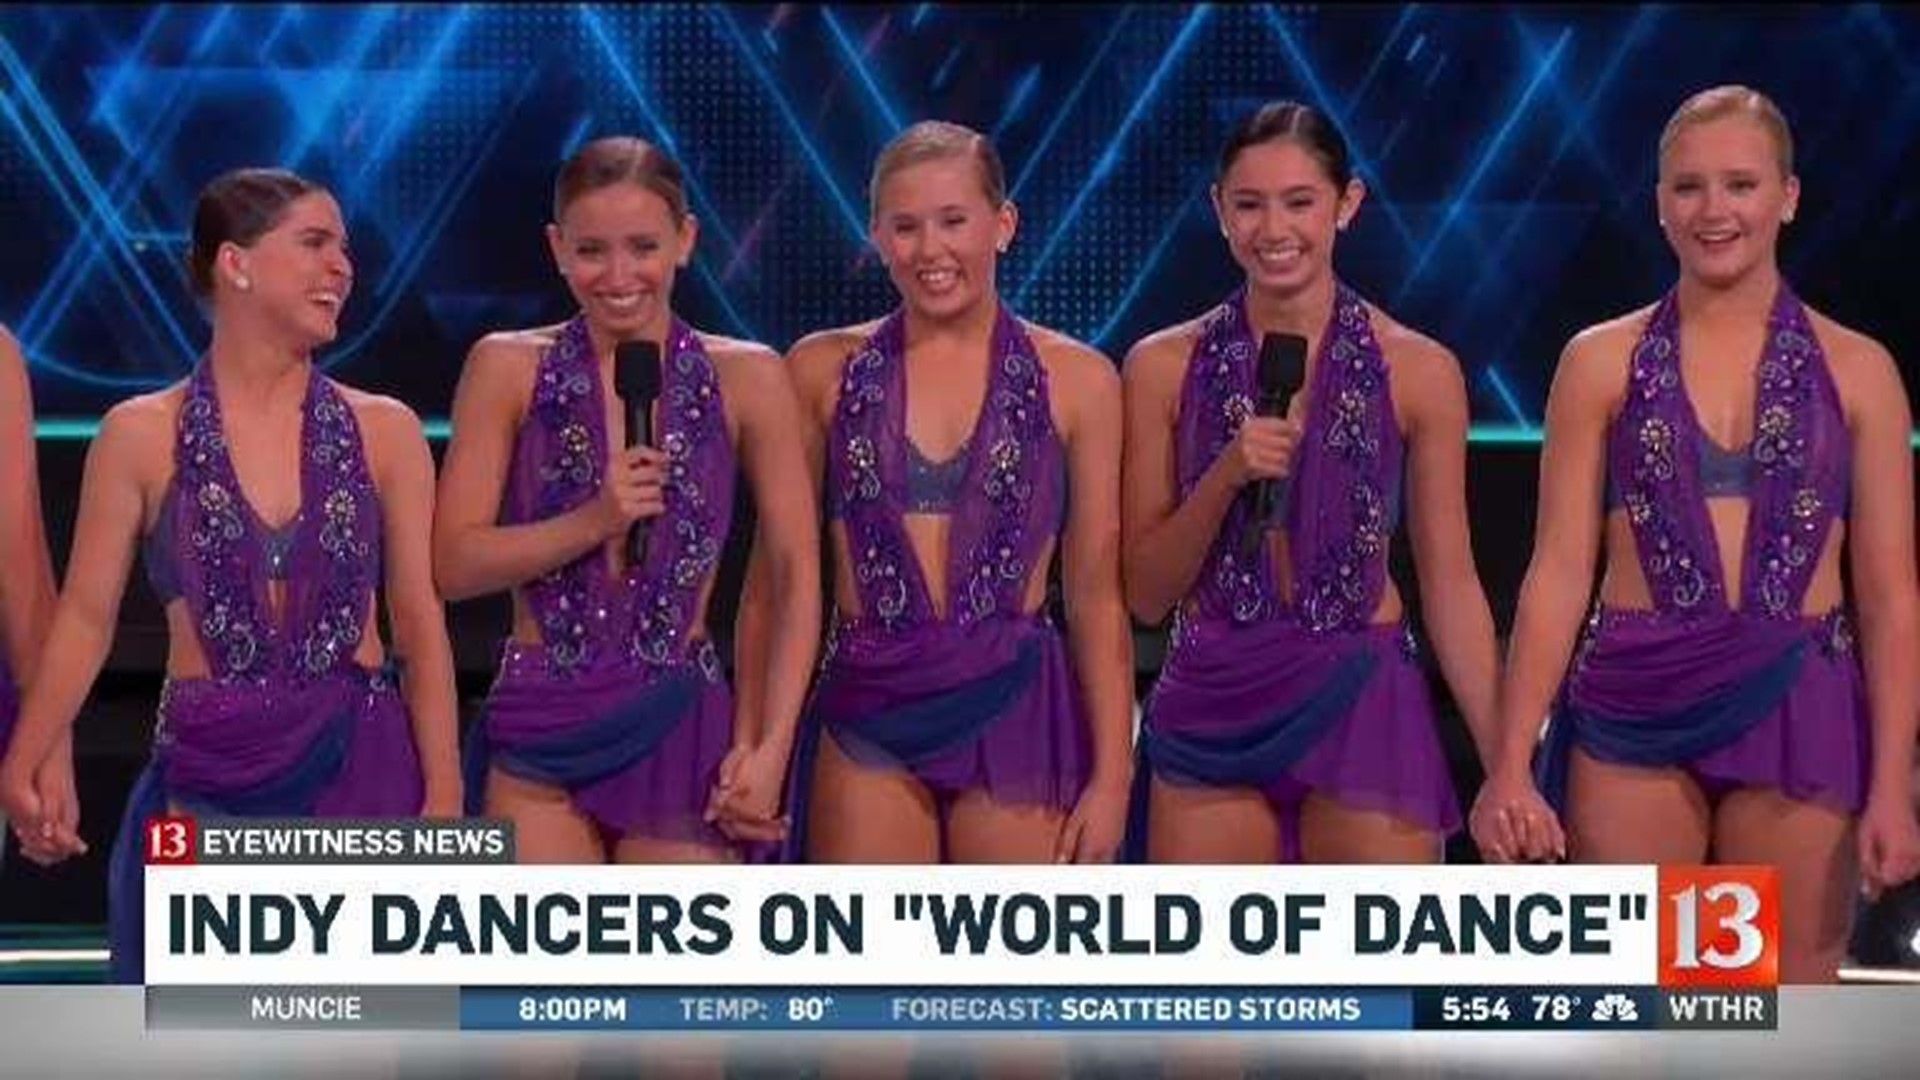 Local group on World of Dance